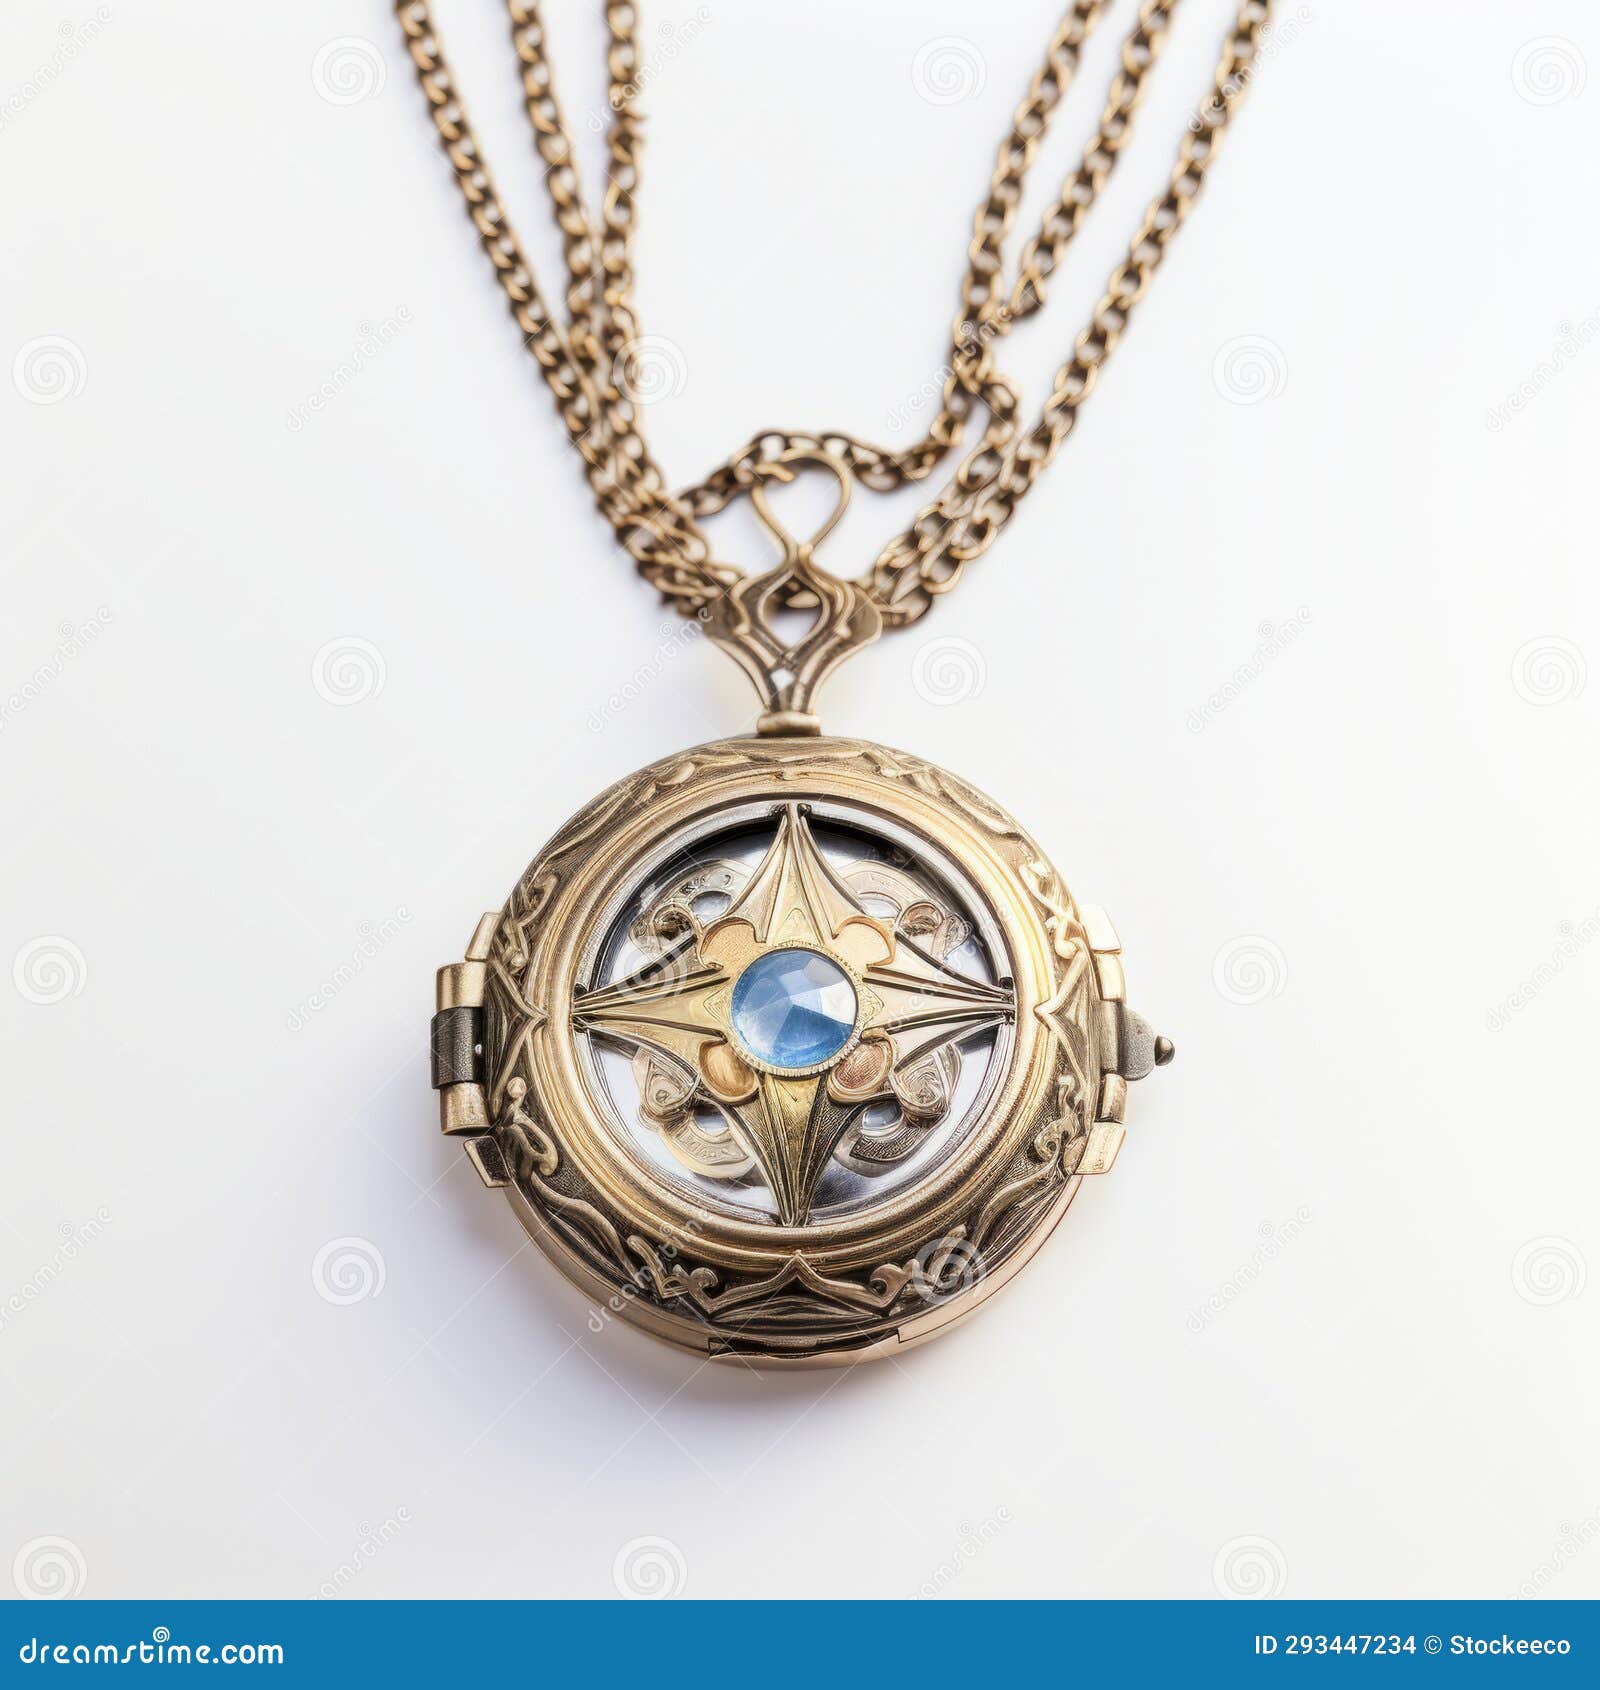 gold compass necklace with blue stones - inspired by sheikh